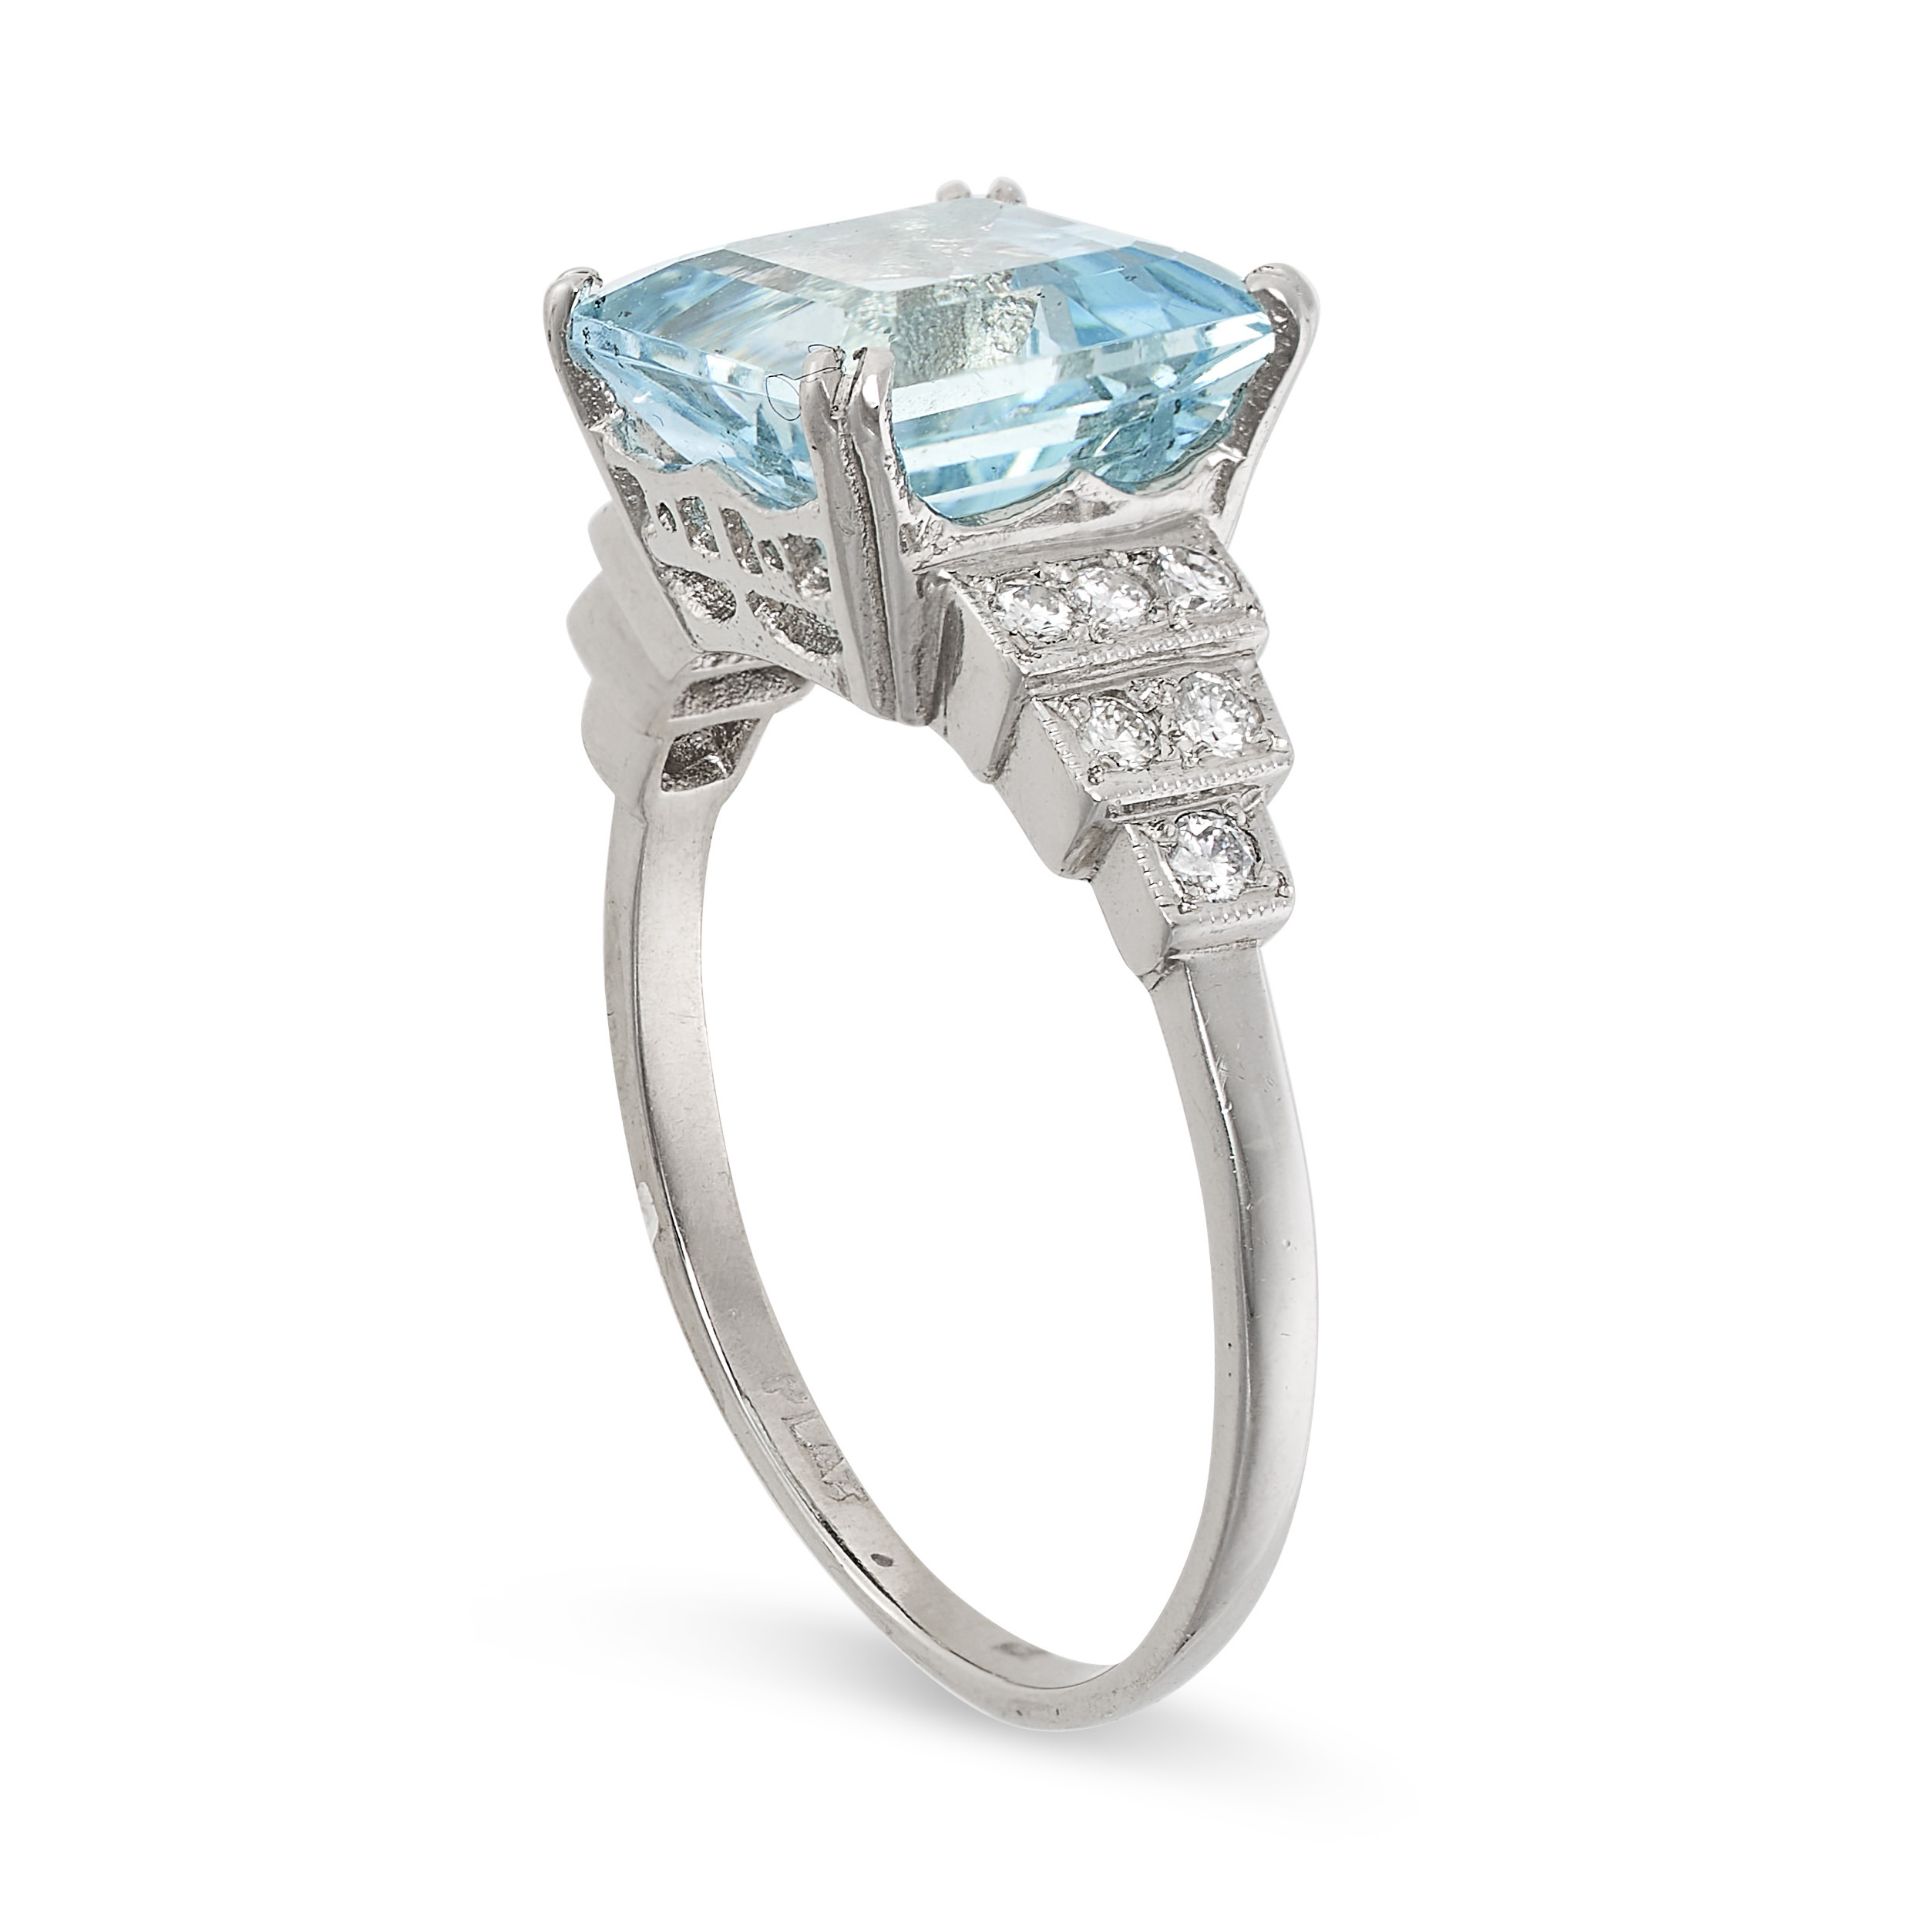 AN AQUAMARINE AND DIAMOND RING in platinum, set with a square step cut aquamarine of approximatel... - Image 2 of 2